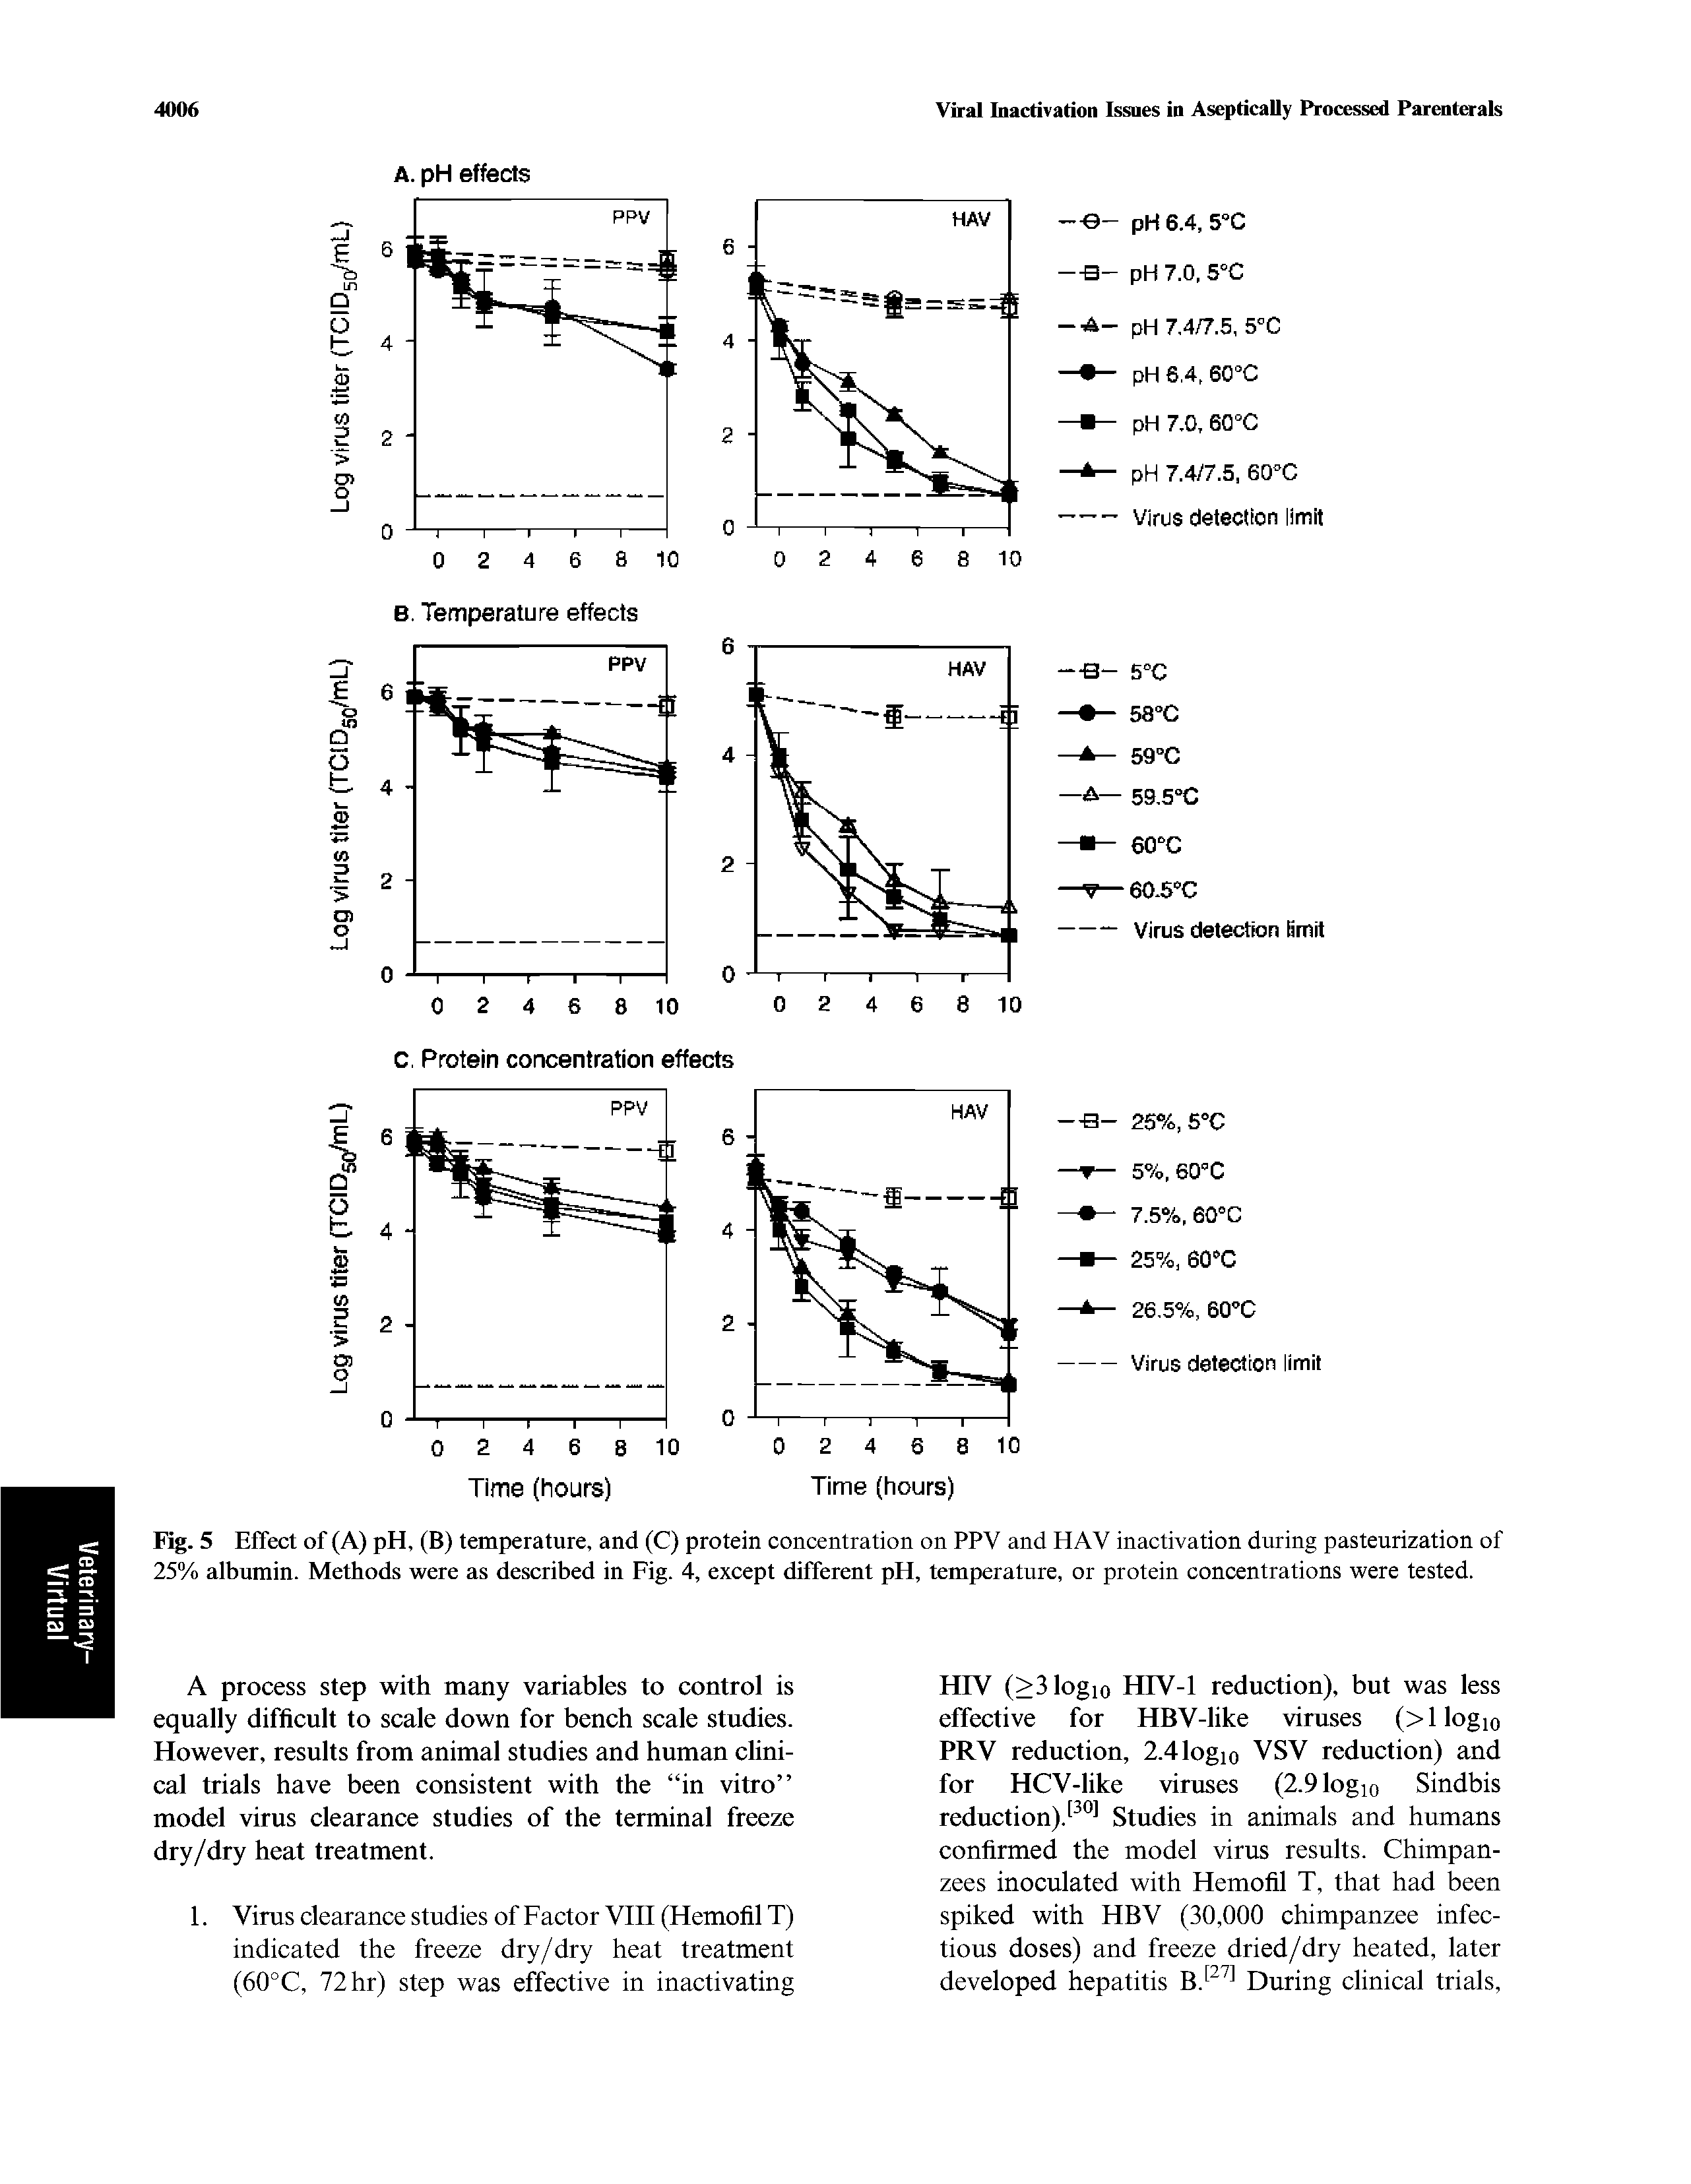 Fig. 5 Effect of (A) pH, (B) temperature, and (C) protein concentration on PPV and HAV inactivation during pasteurization of 25% albumin. Methods were as described in Fig. 4, except different pH, temperature, or protein concentrations were tested.